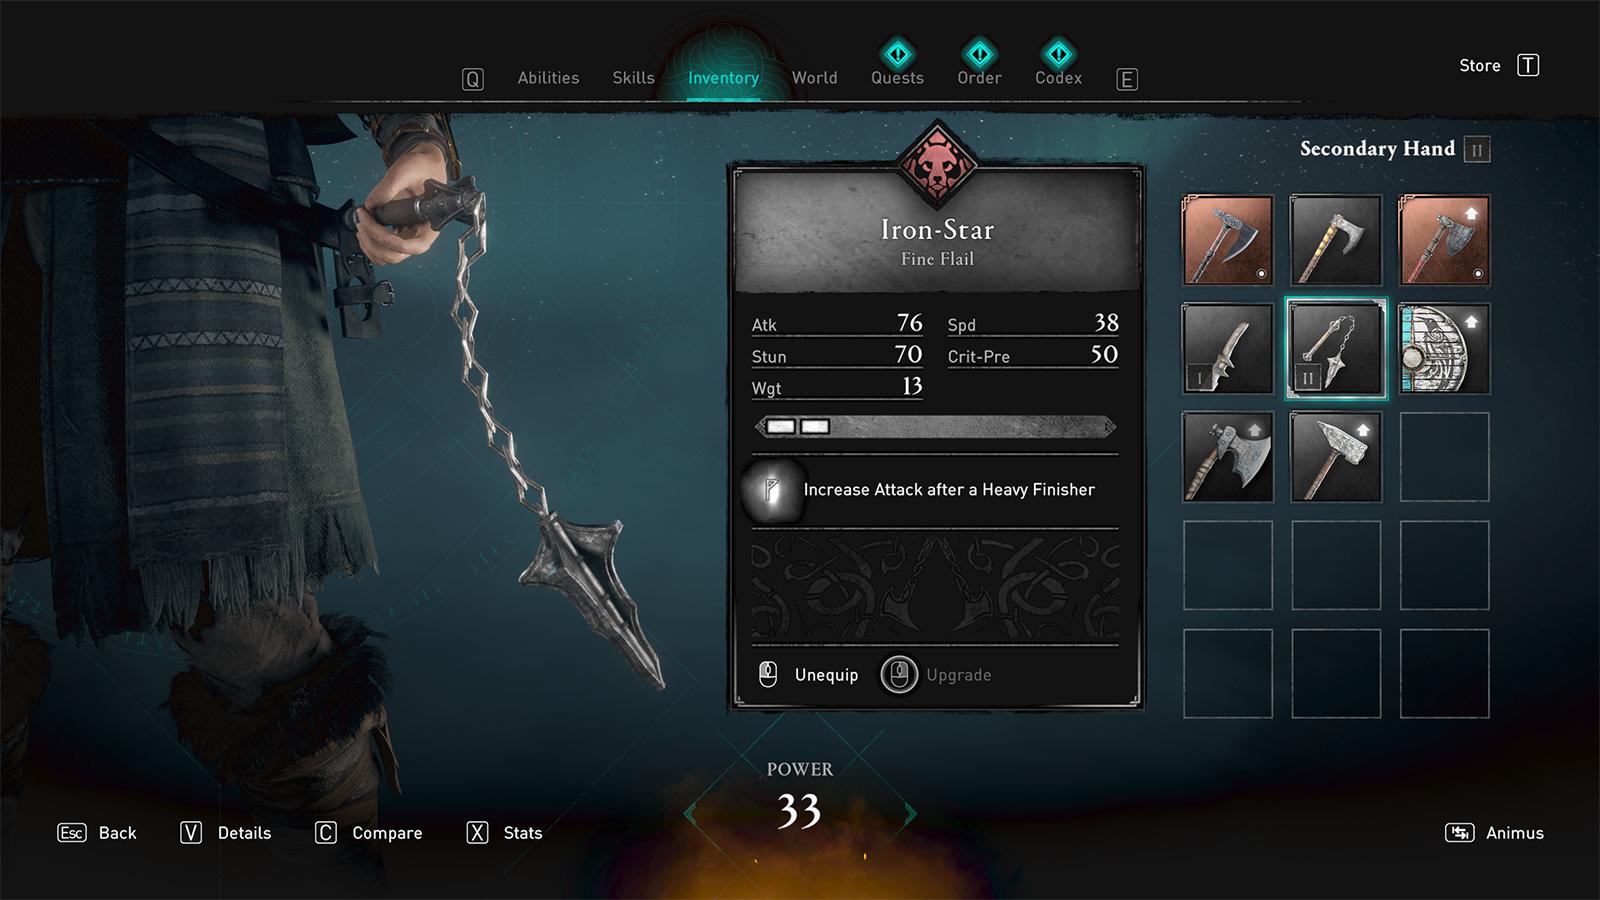 The Iron-Star weapon shown in Assassin's Creed Valhalla with its stats